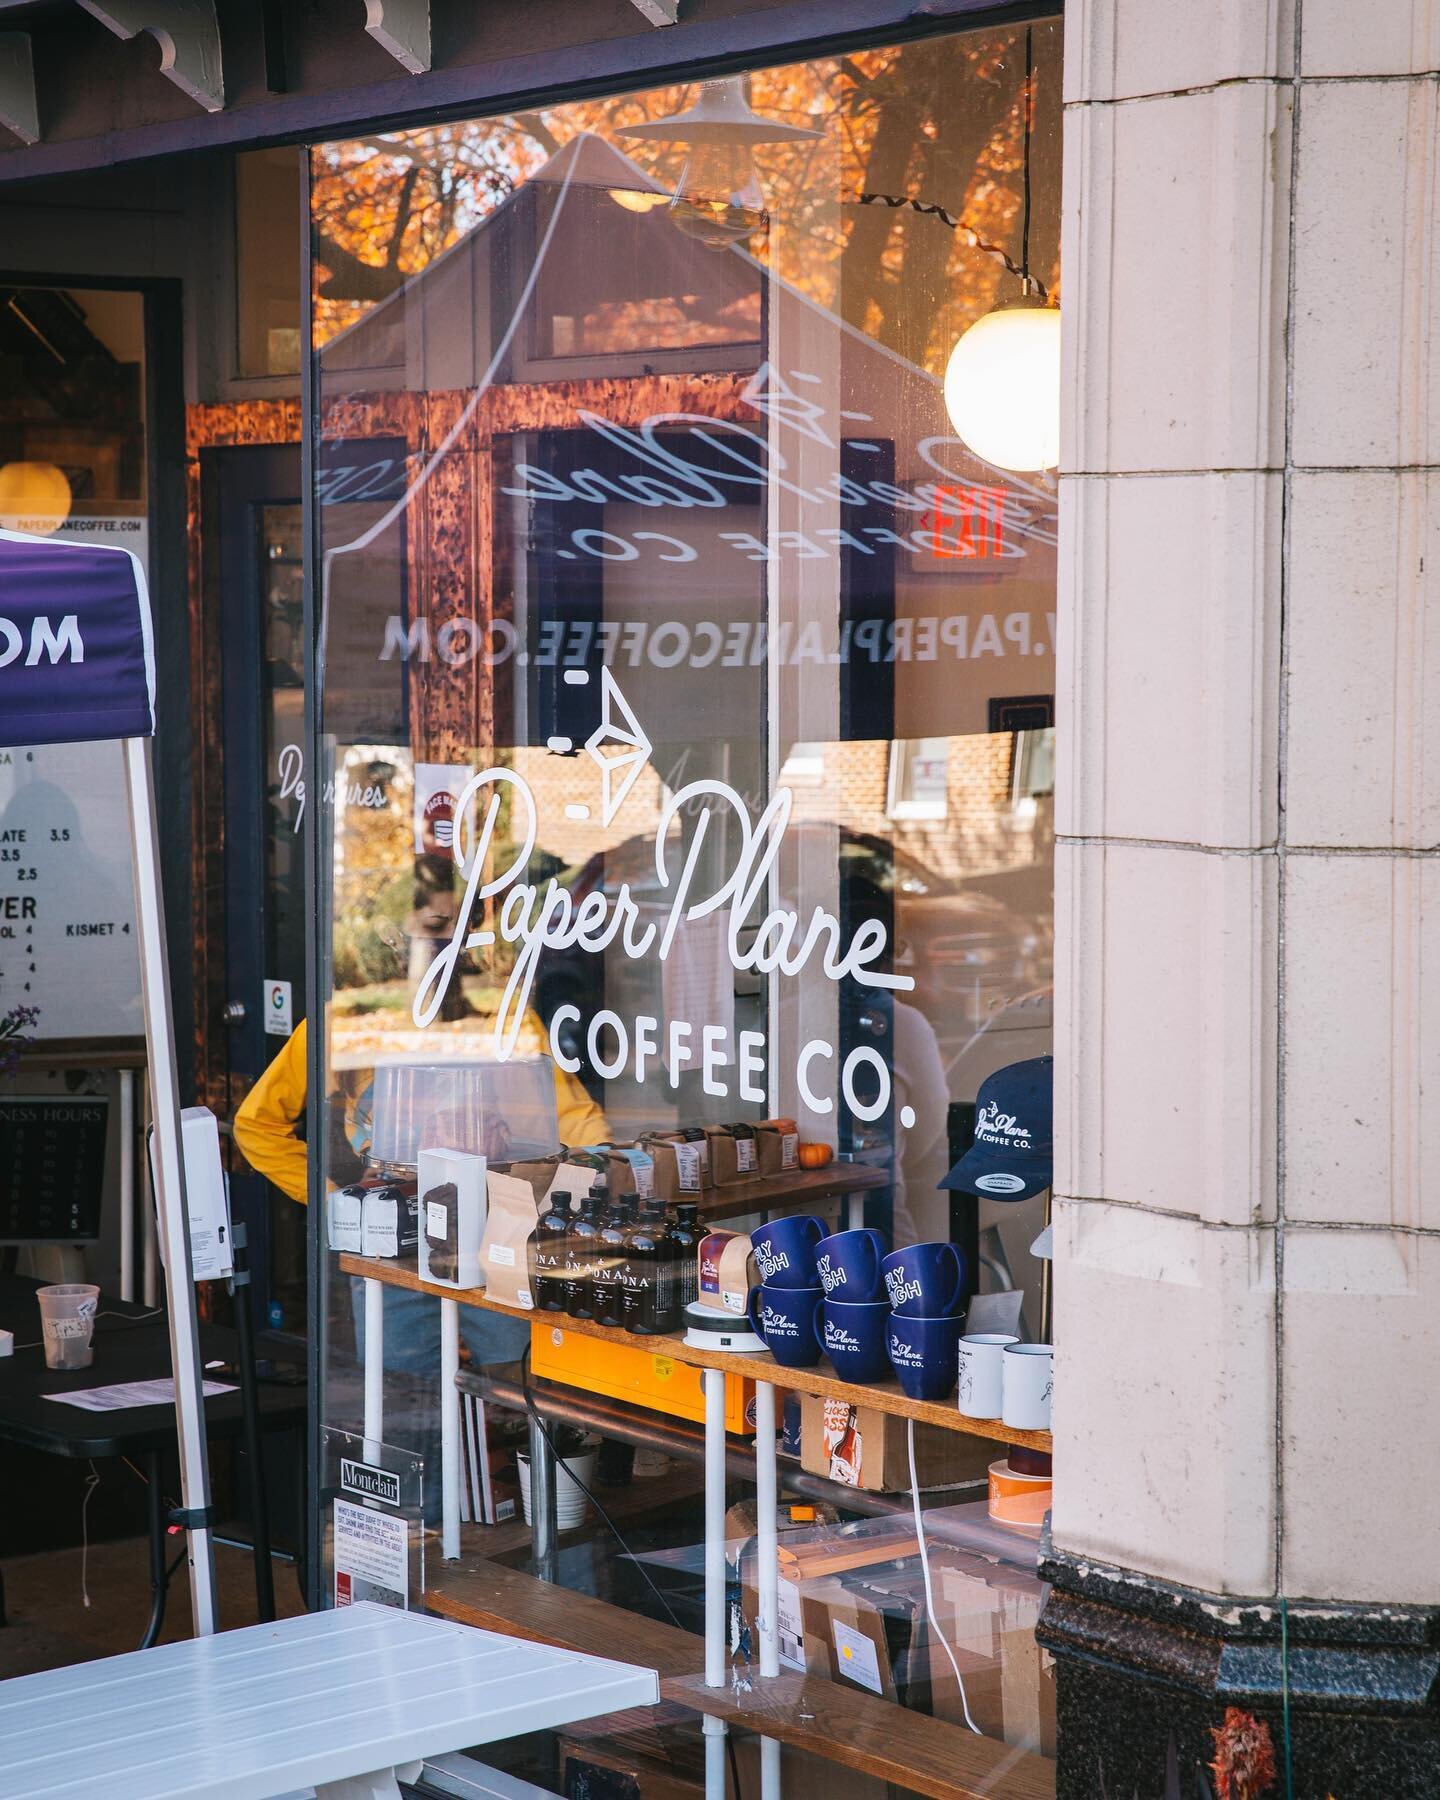 Time for that afternoon pick-me-up 🥱☕️ Do you feel like WFH makes you need it more or less? We recently heard that @paperplanecoffeeco is now at Whole Foods in northern NJ (including Montclair) 🥳 Congrats y&rsquo;all! #MadeInMontclair⠀
.⠀
.⠀
.⠀
📸: